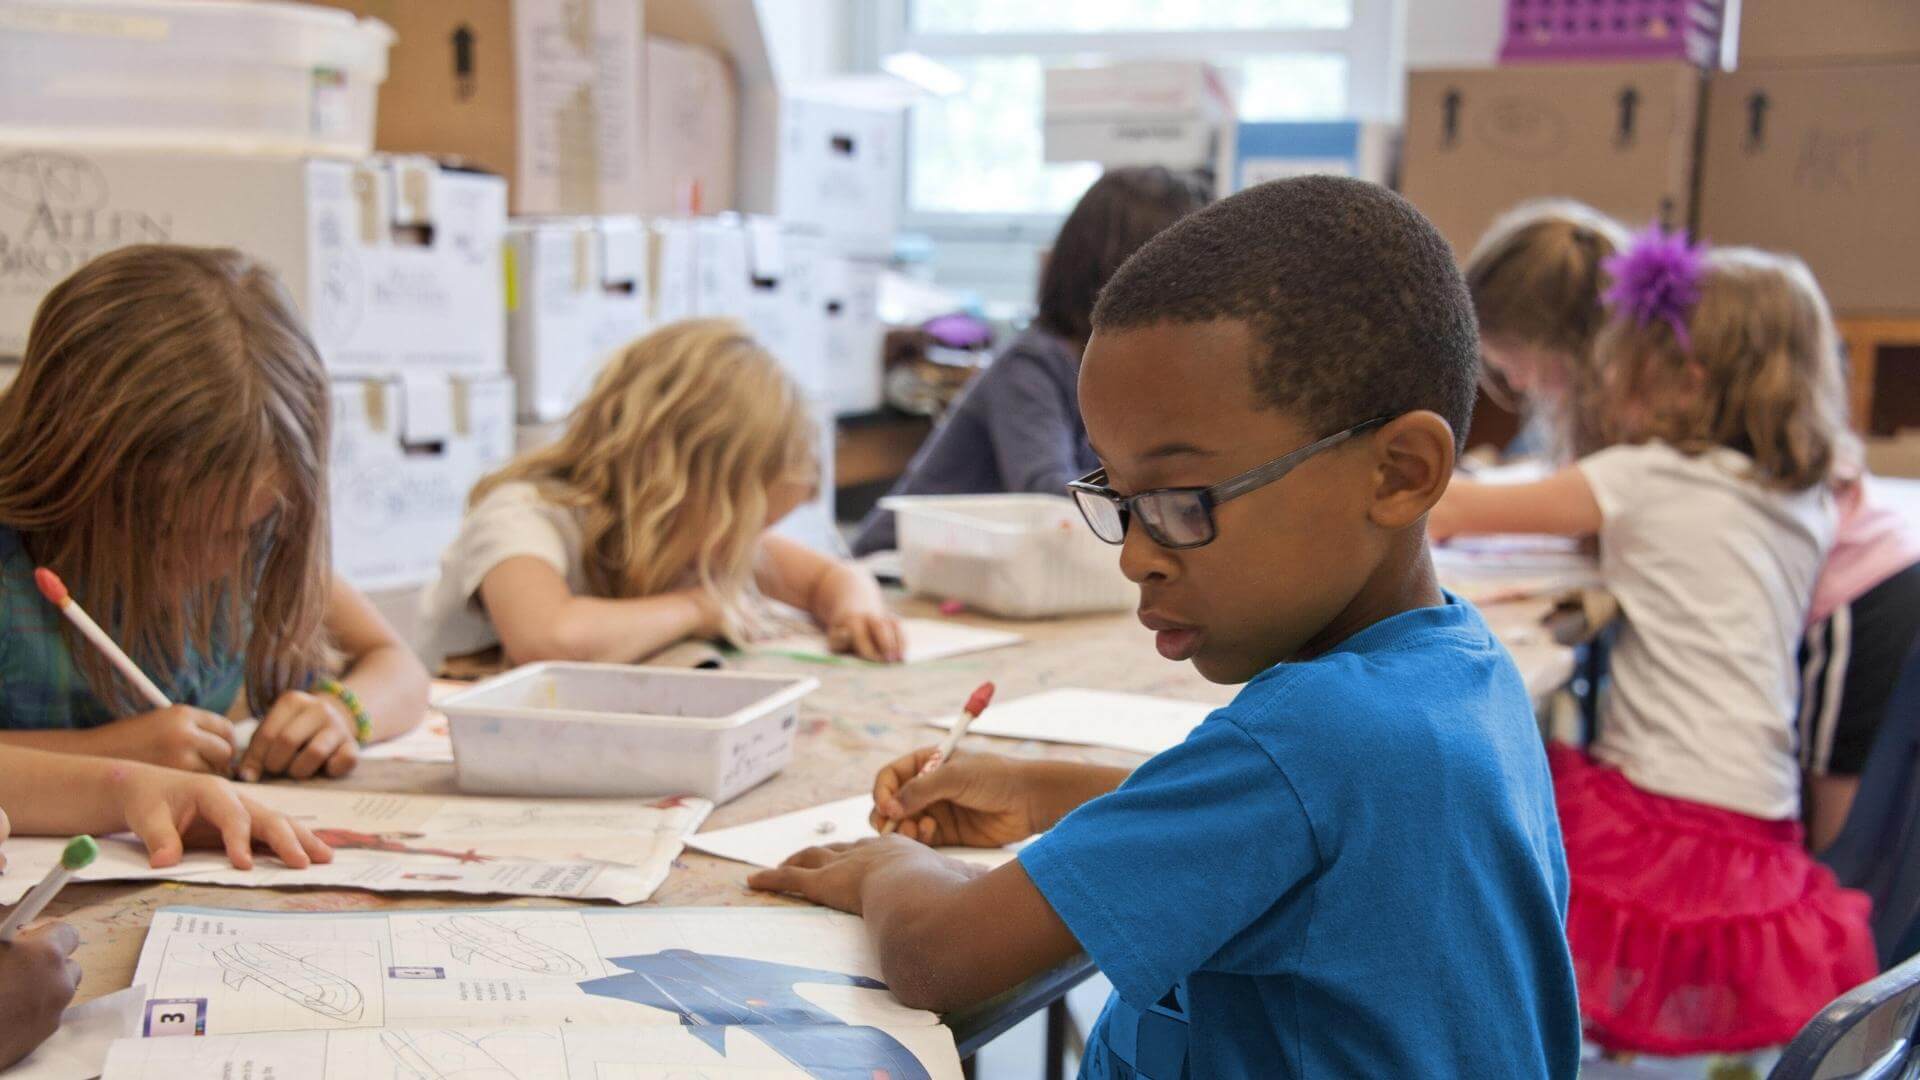 A school child drawing at a desk.